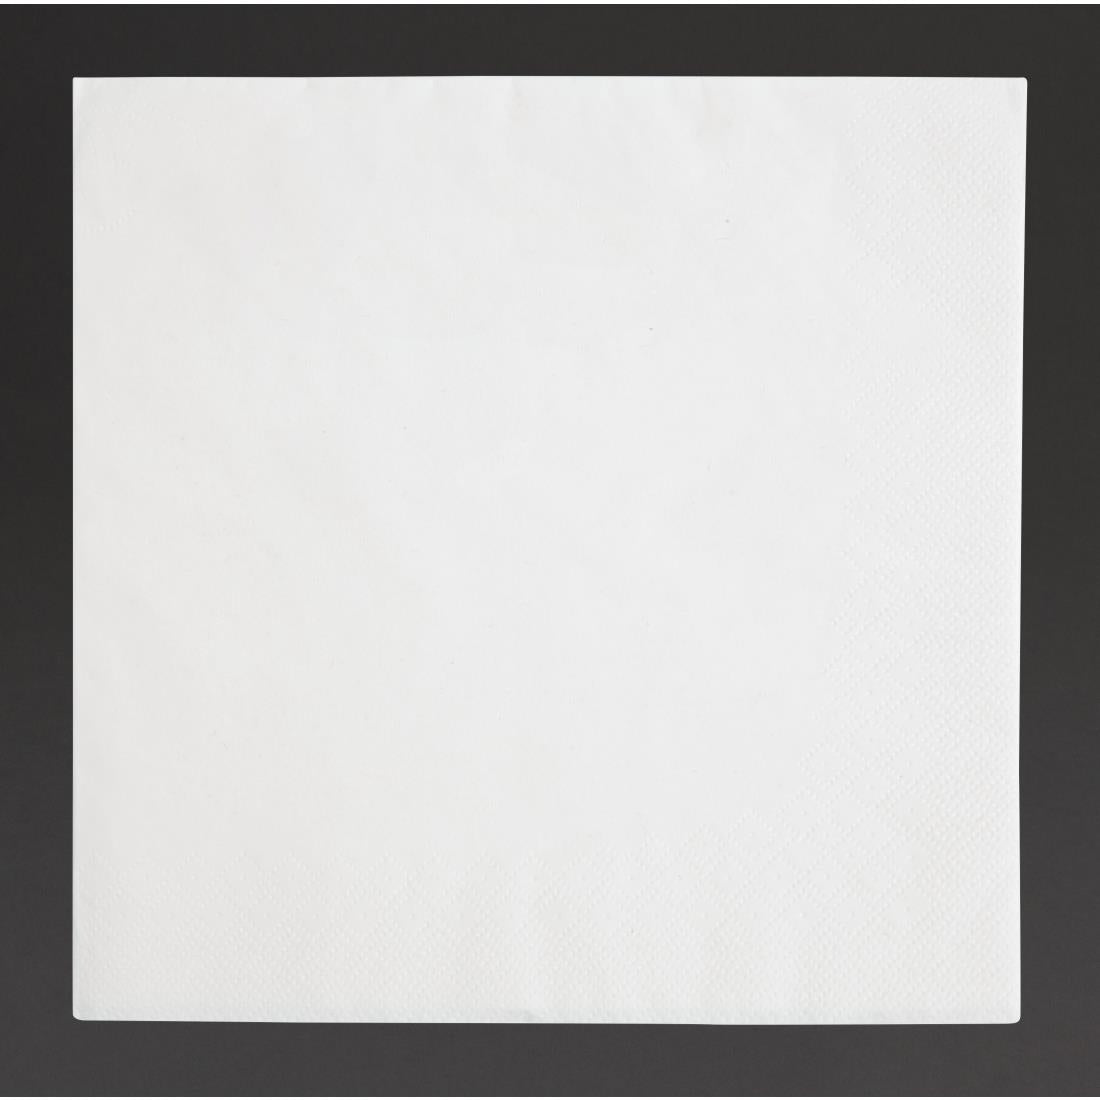 FE251 Fiesta Recyclable Dinner Napkin White 40x40cm 3ply 1/4 Fold (Pack of 1000) JD Catering Equipment Solutions Ltd